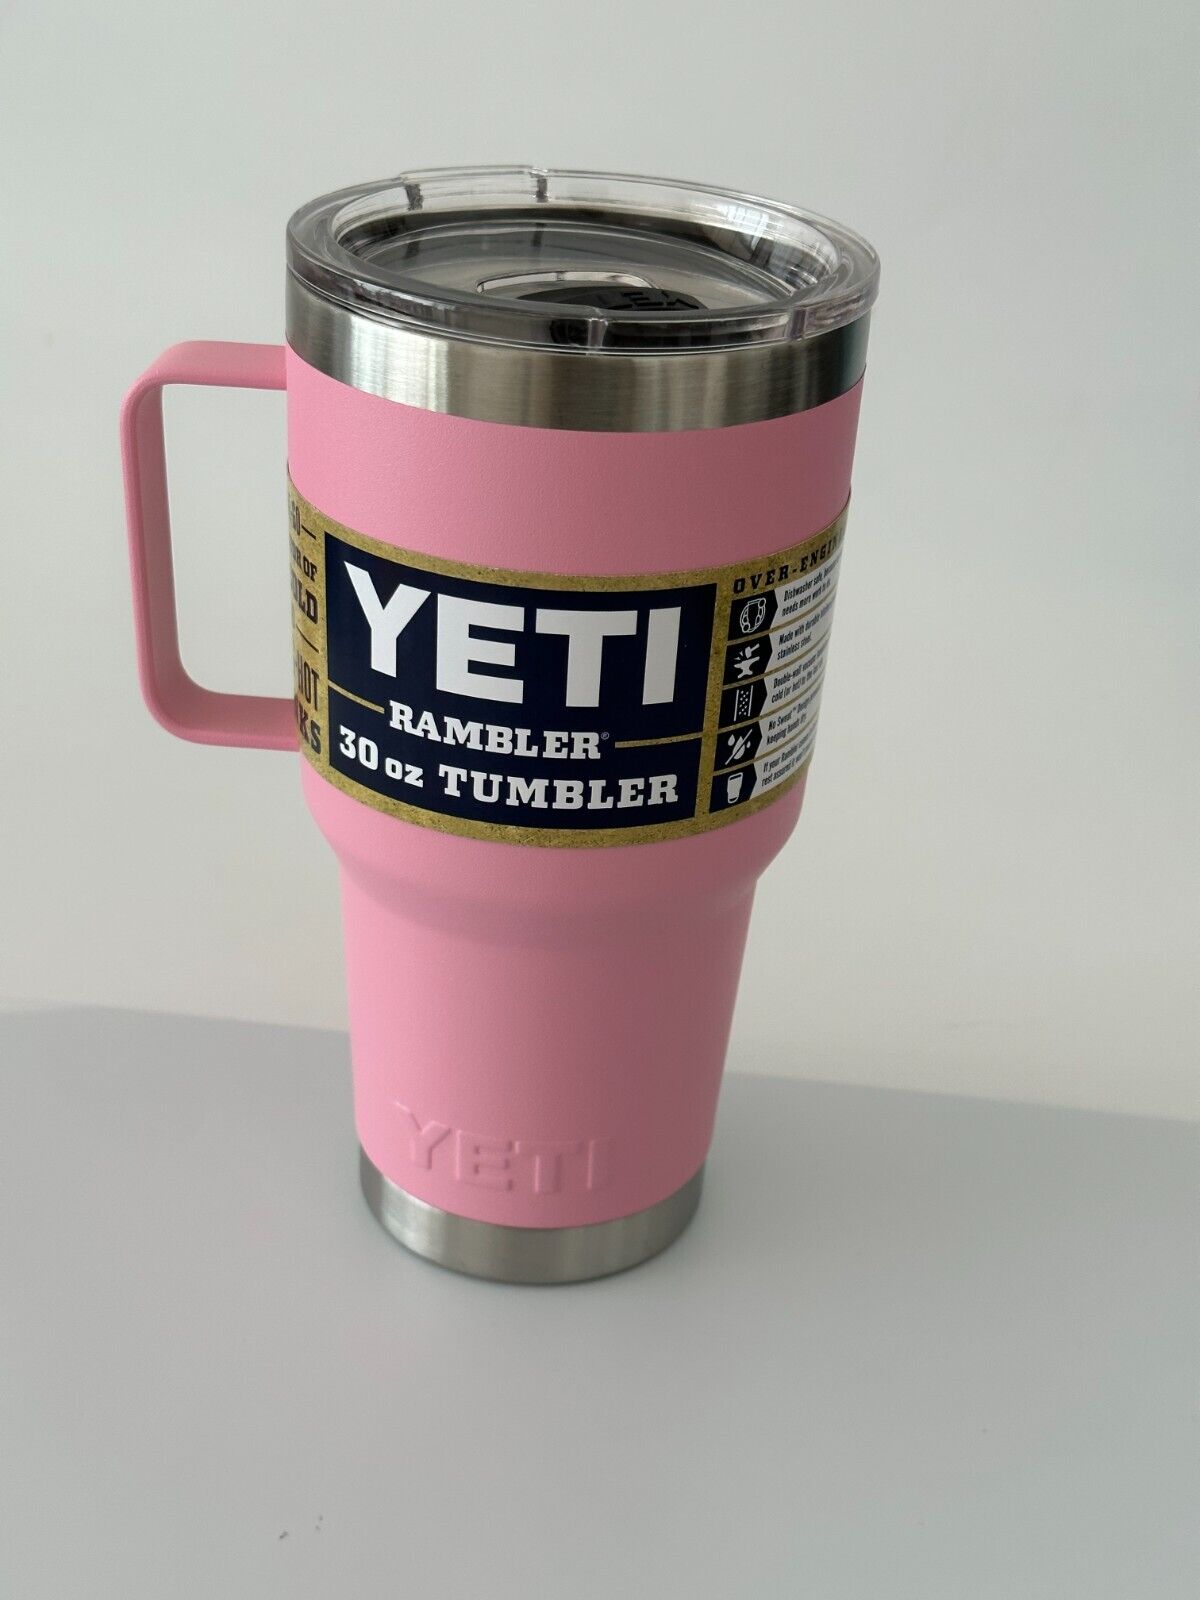 The County Stores, Inc. - Yeti Ice Pink has arrived! Limited Supply!